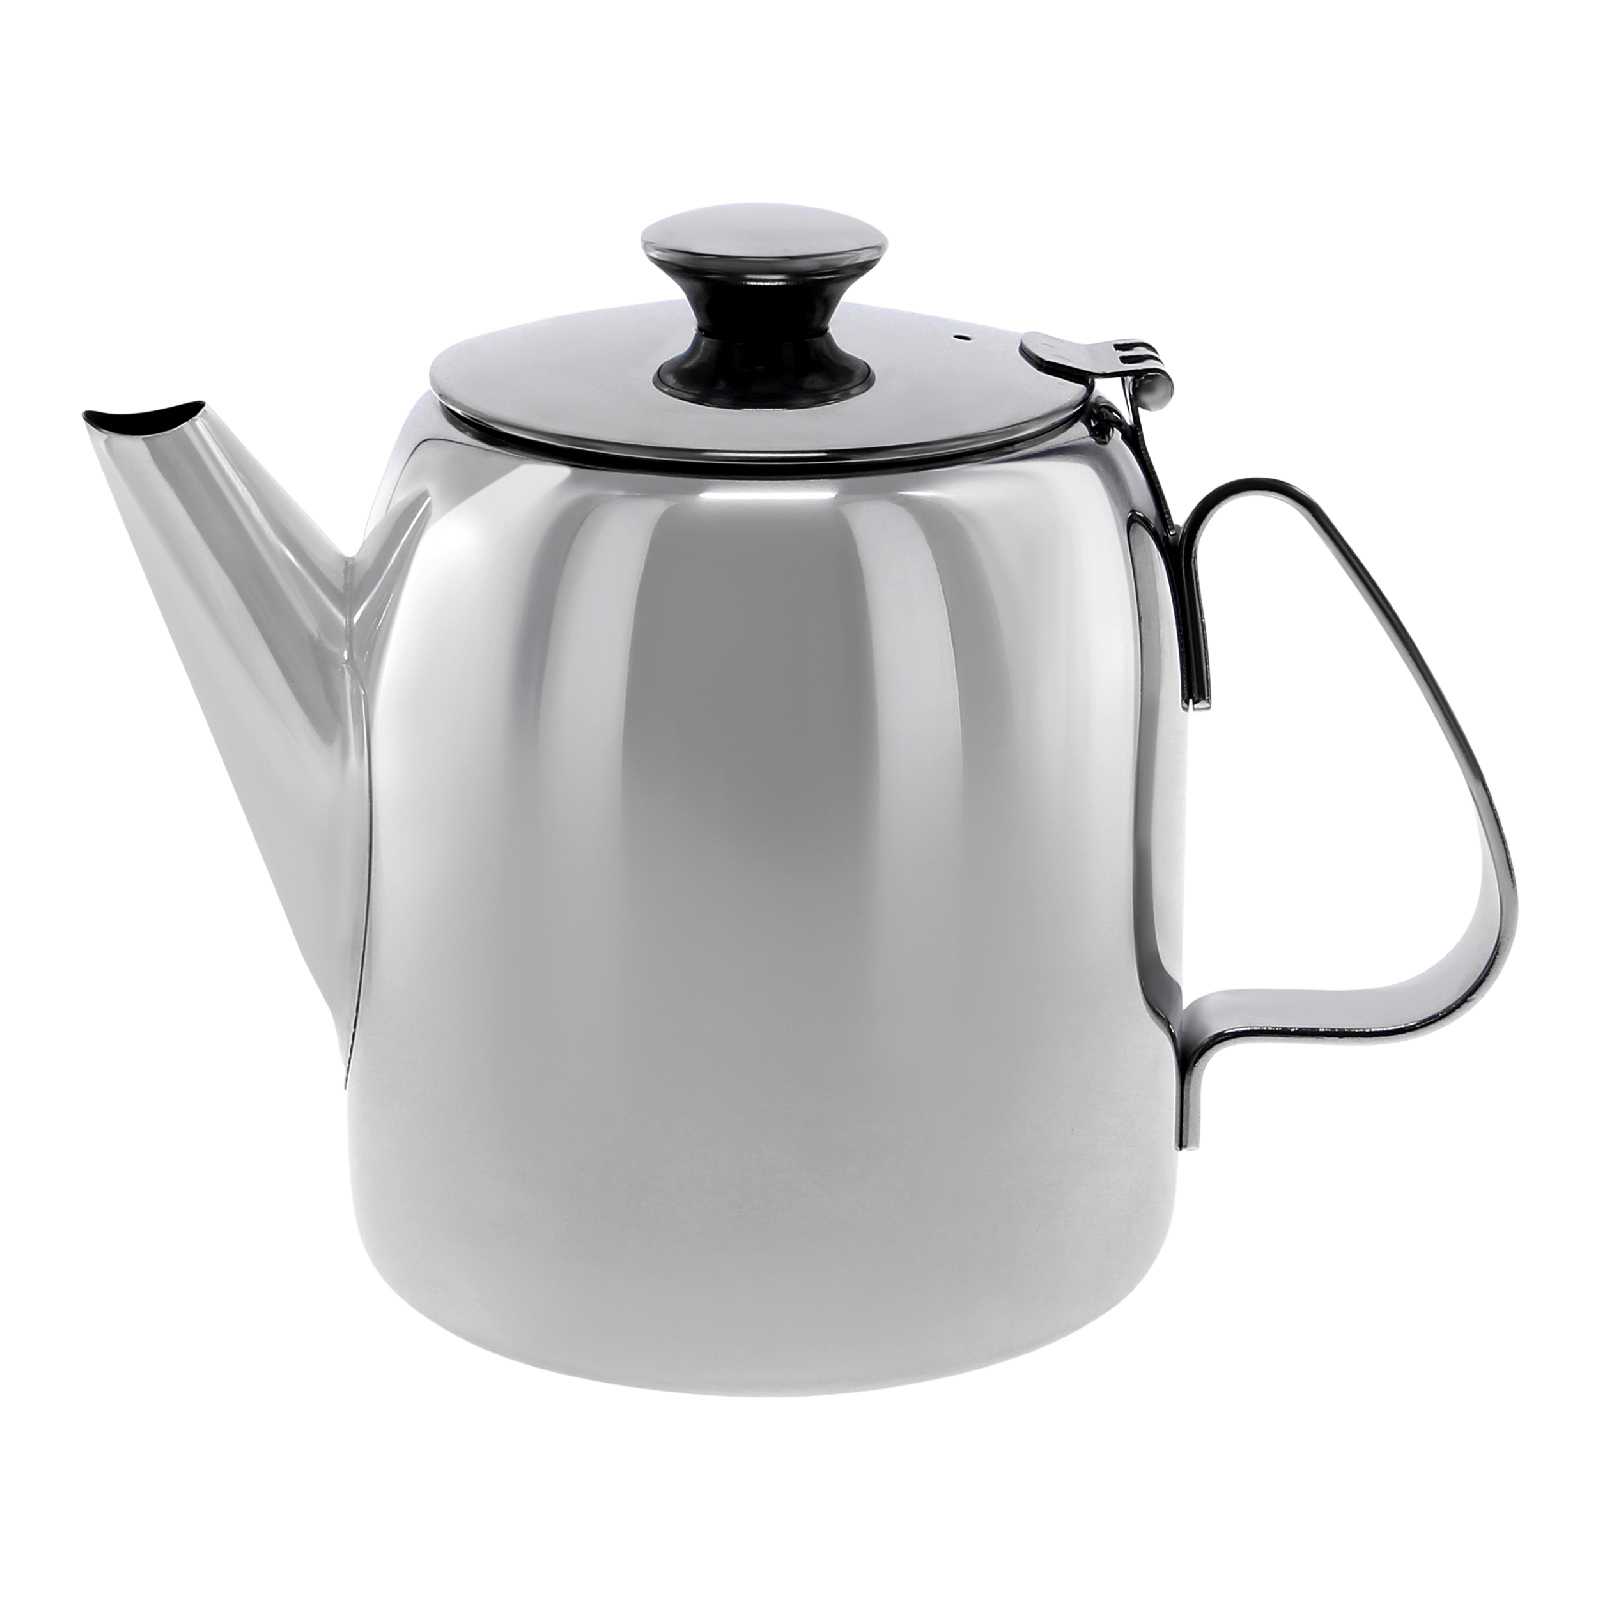 555 Stainless Steel Coffee Pot